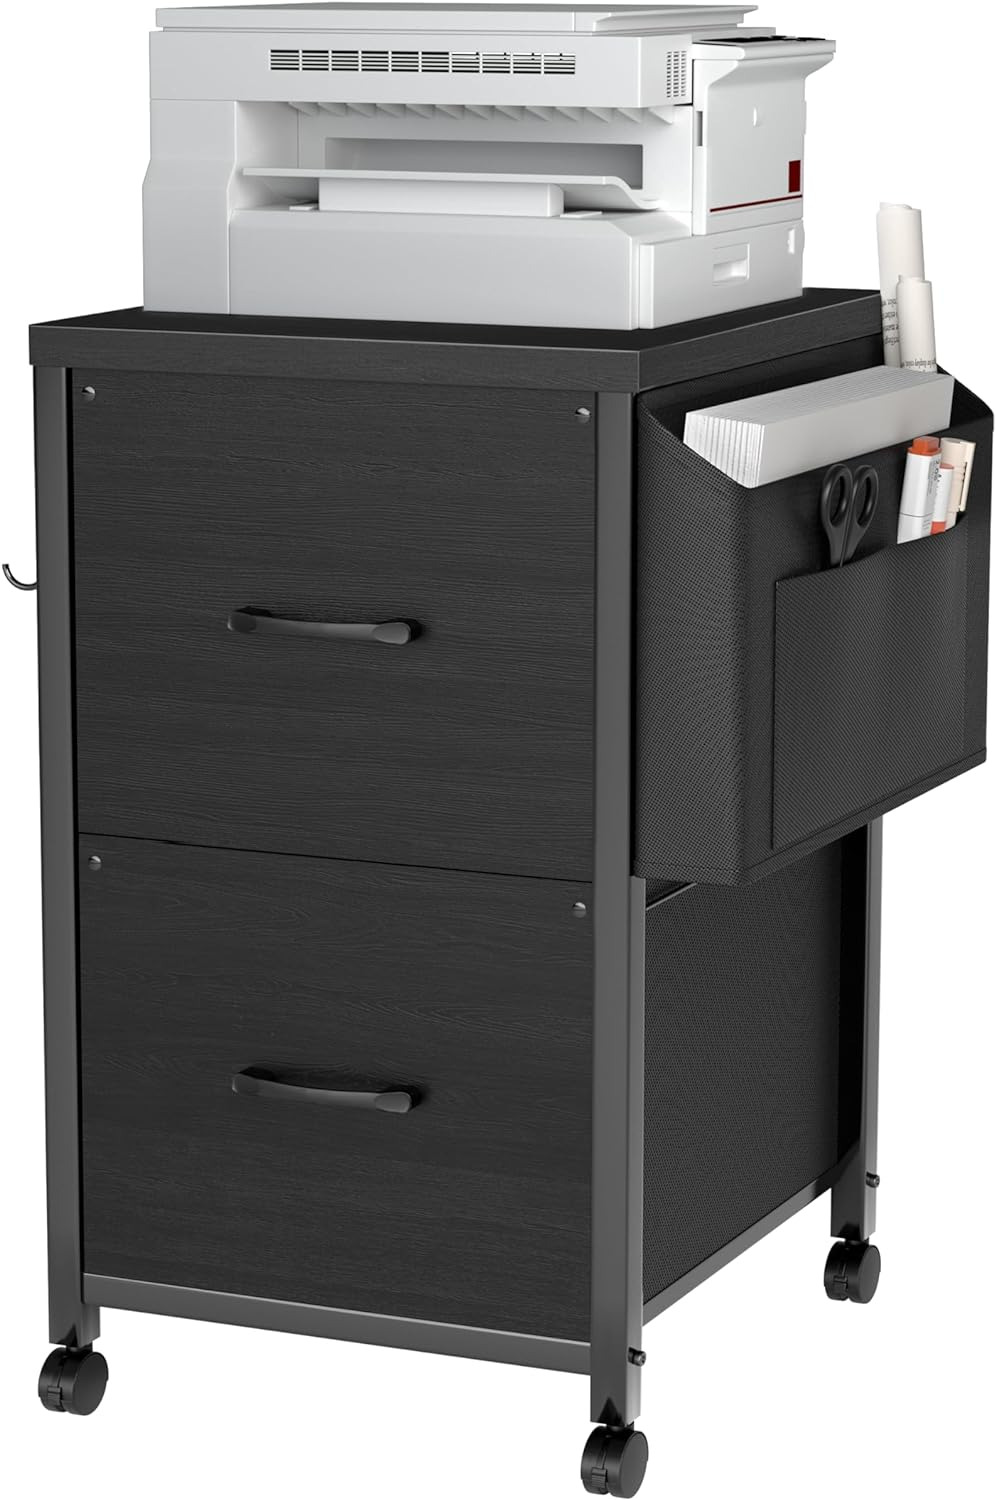 2 Drawer File Cabinet on Wheels for Home Office, Rolling Small Fabric Filing